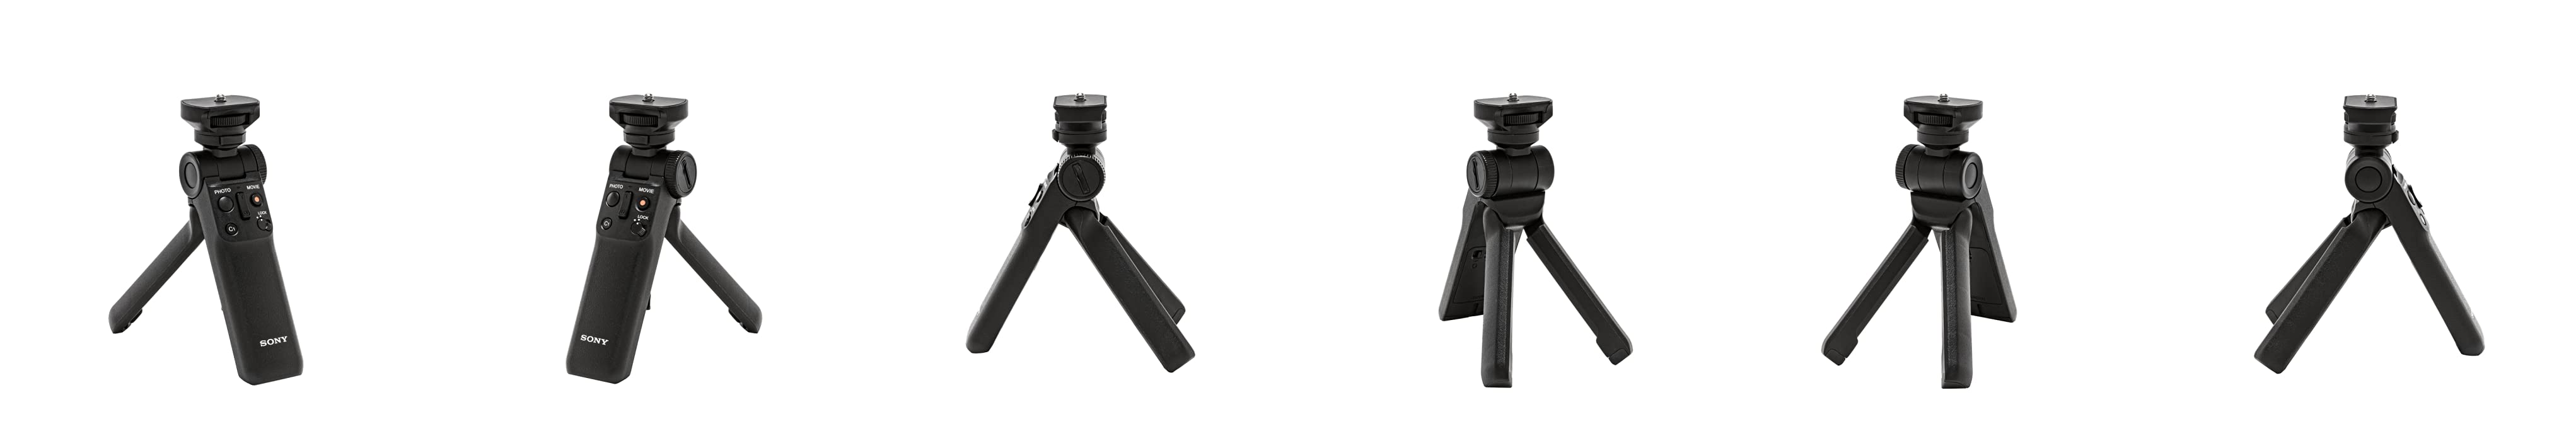 Sony GP-VPT2BT Handgrip (for Selfies and Vlogging, Can Also be Used As a Tripod, Compatible with Select Alpha and Cyber-Shot Cameras from Sony) Black